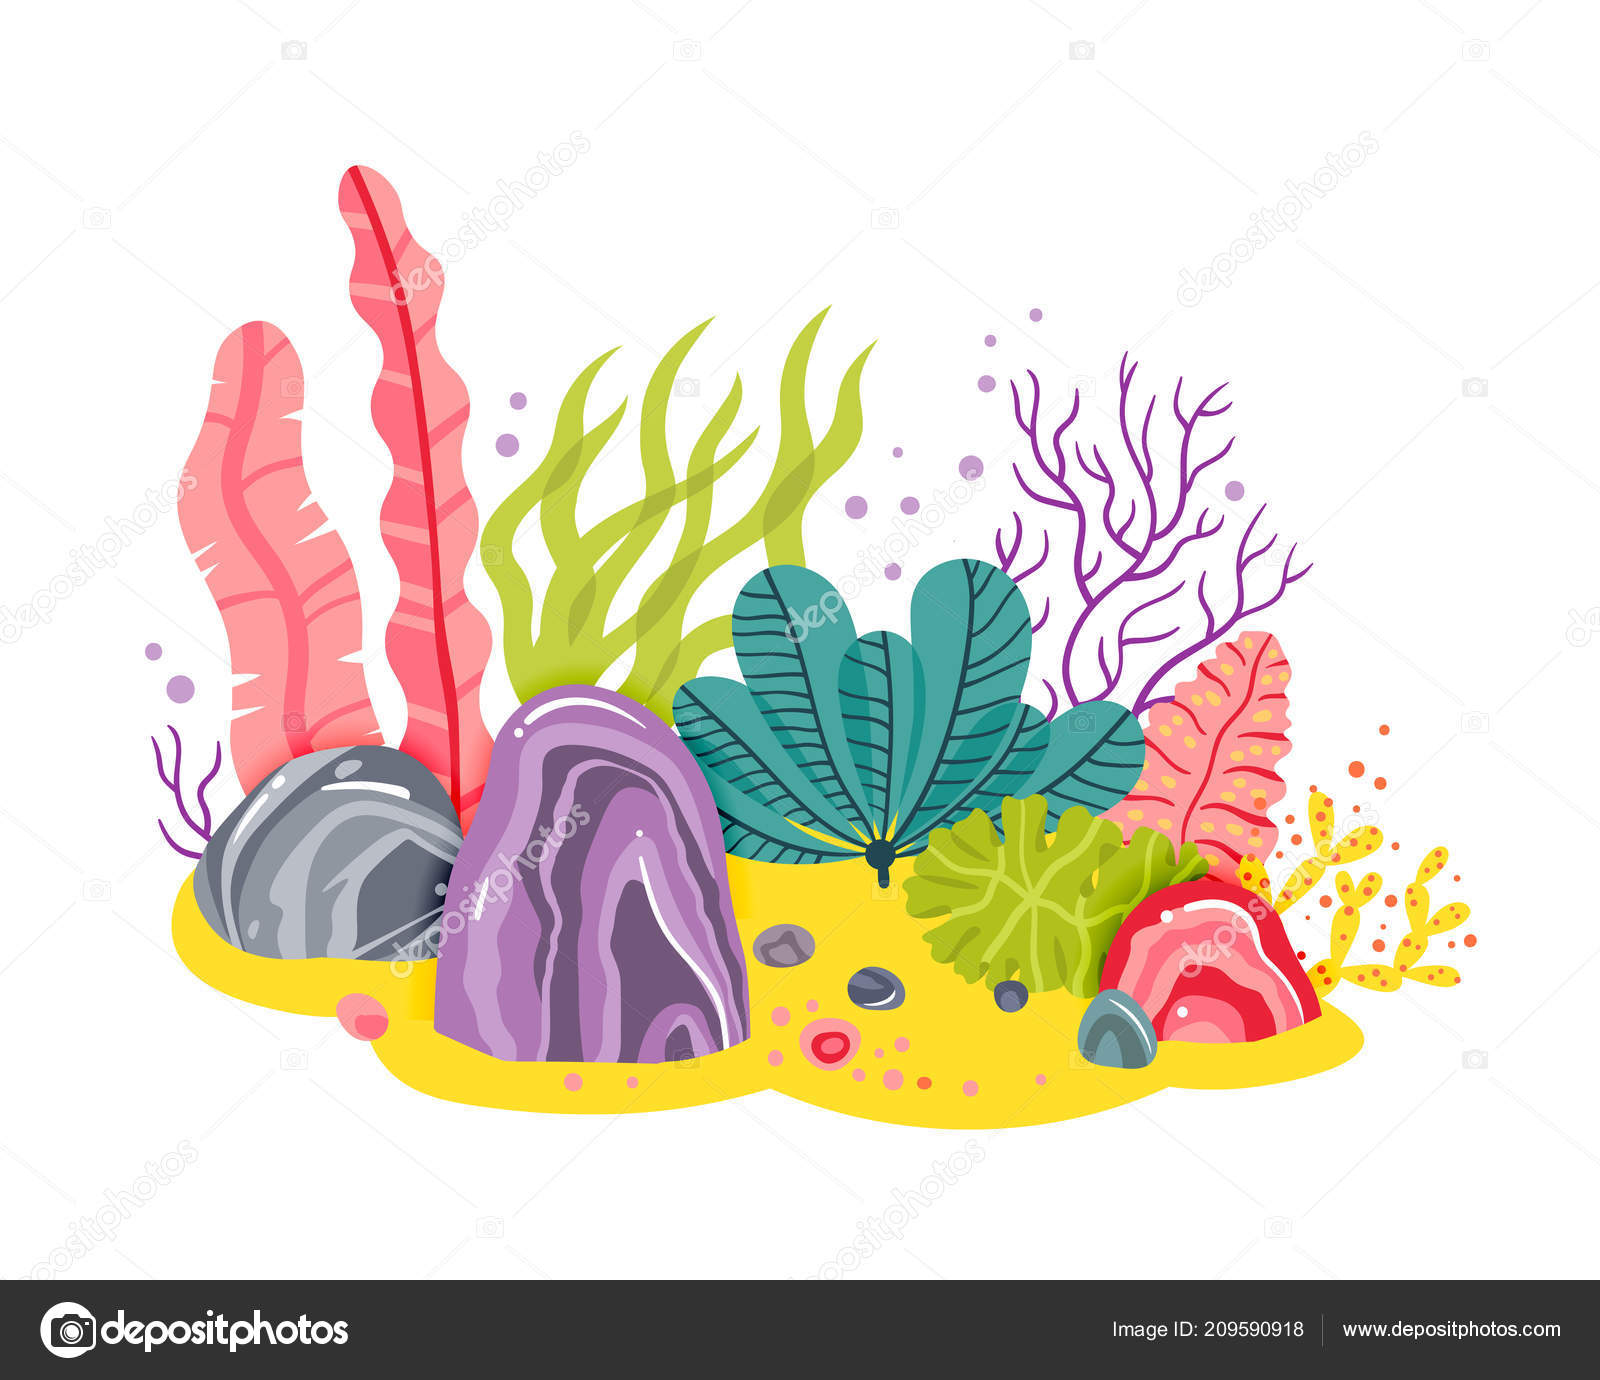 Coral reef and seaweed underwater plant. - Stock Illustration